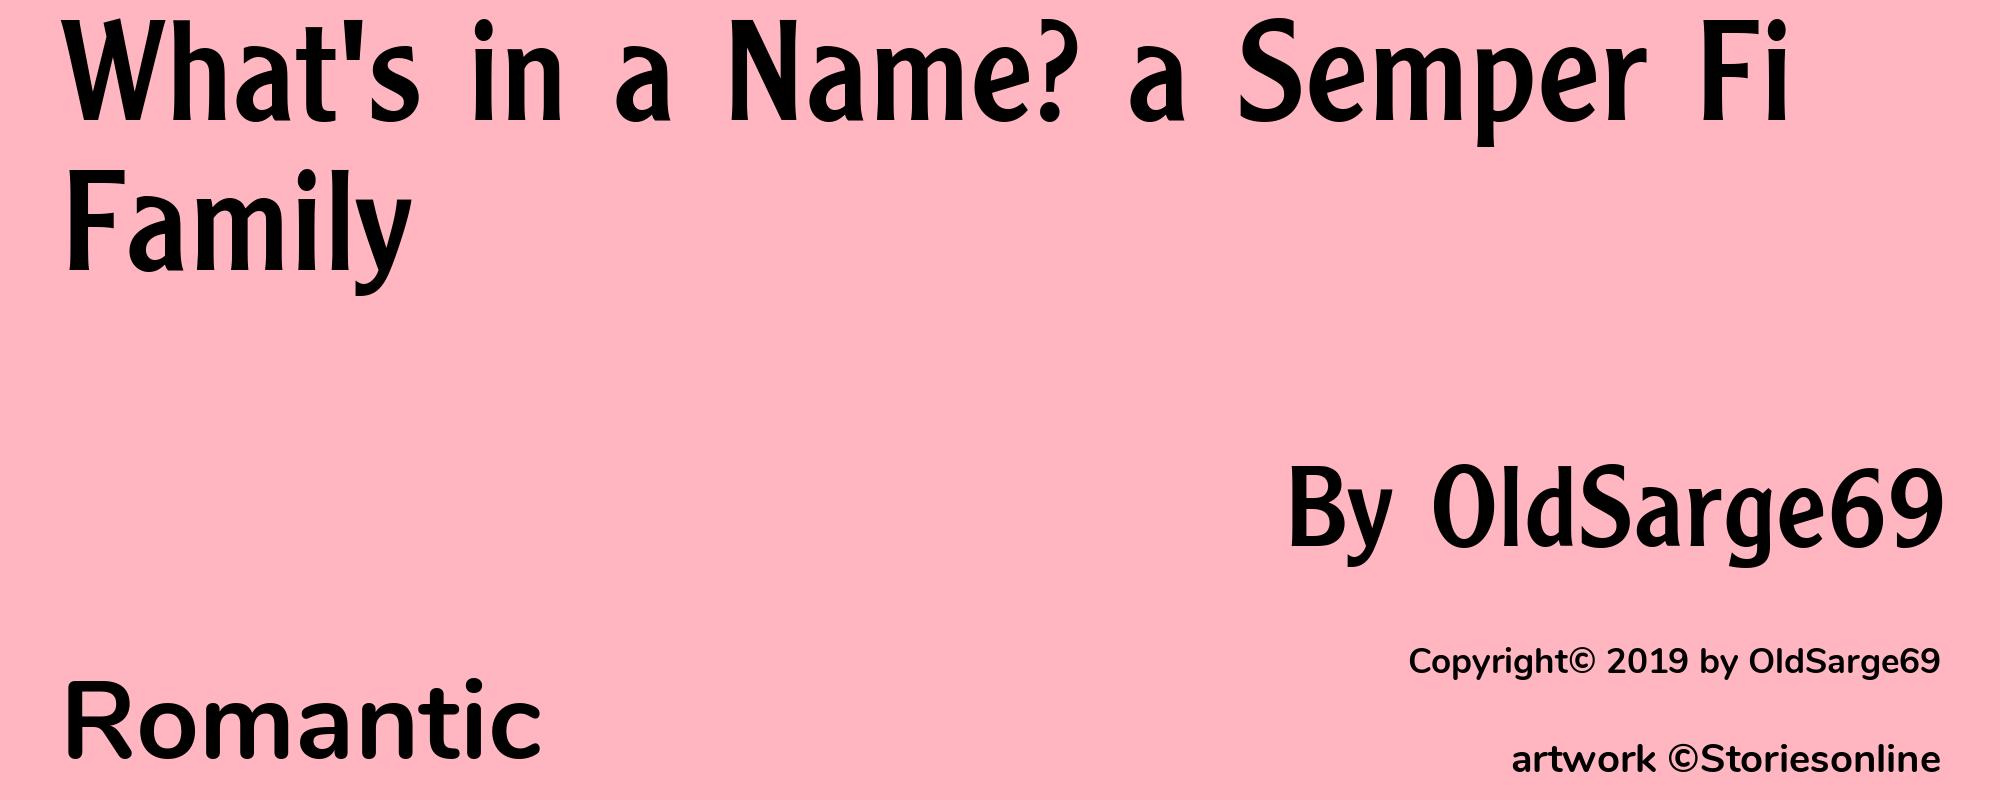 What's in a Name? a Semper Fi Family - Cover